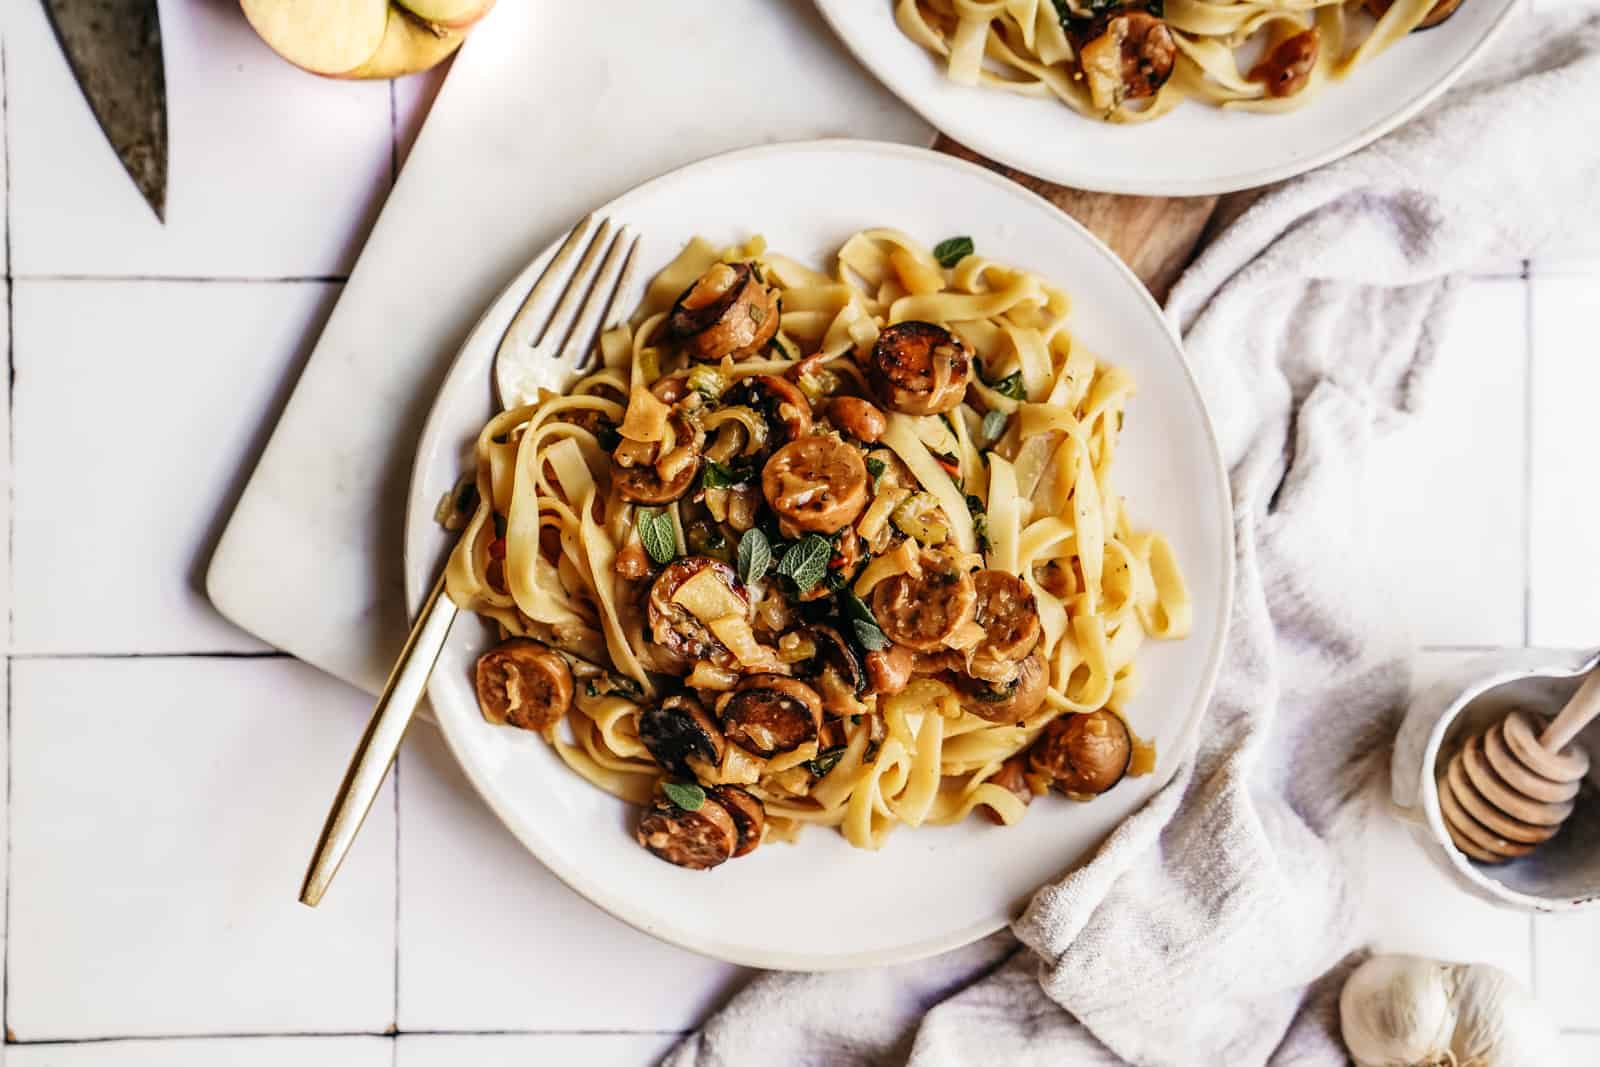 https://www.foodbymaria.com/wp-content/uploads/2020/09/Easy-Vegan-Sausage-Pasta-with-Apple-and-Sage.jpg